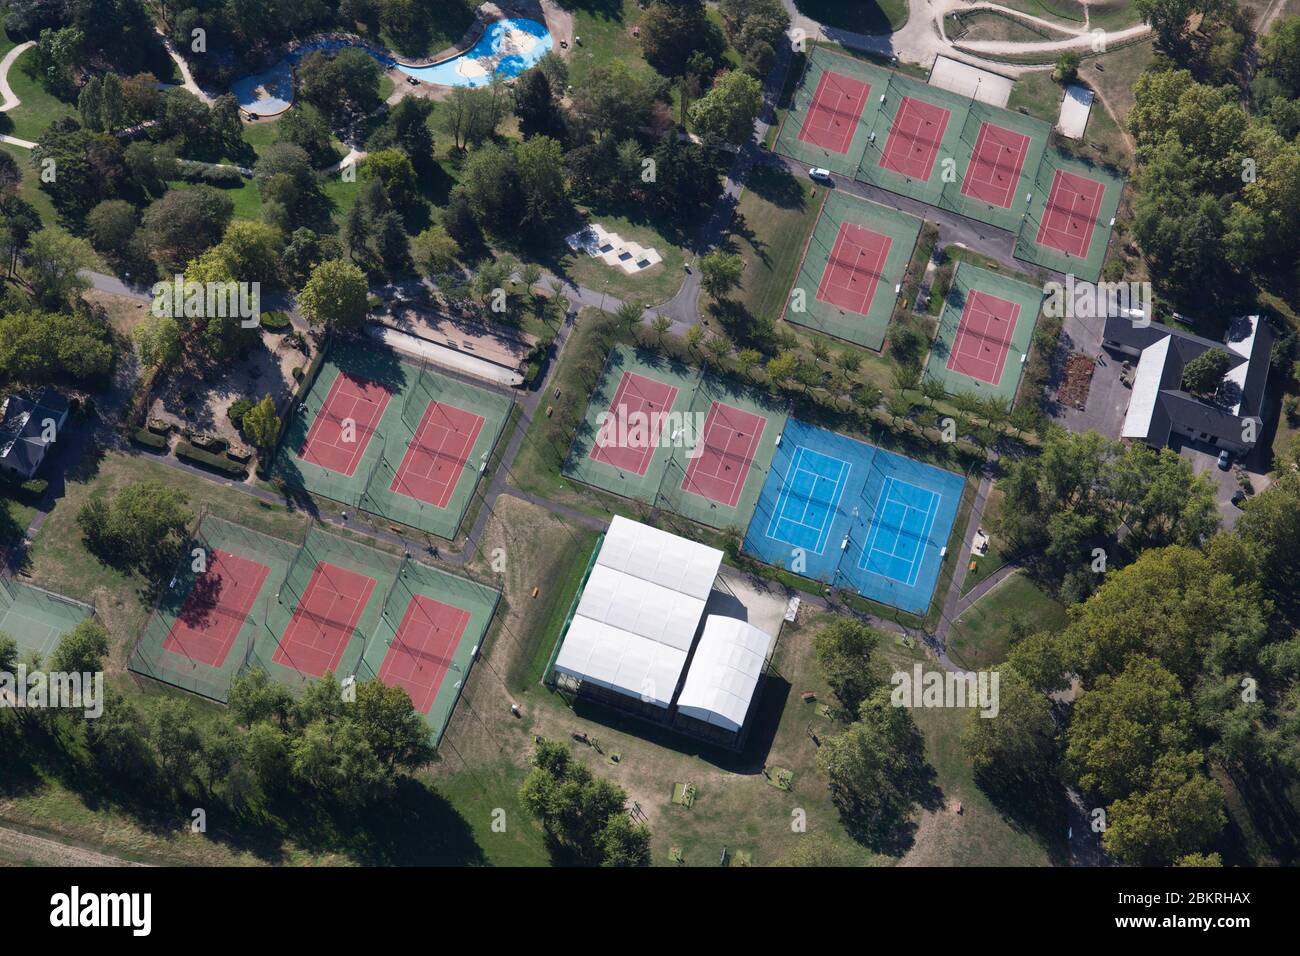 France, Val de Marne, Champigny sur Marne, Tremblay leisure and leisure  park, tennis court (aerial view Stock Photo - Alamy